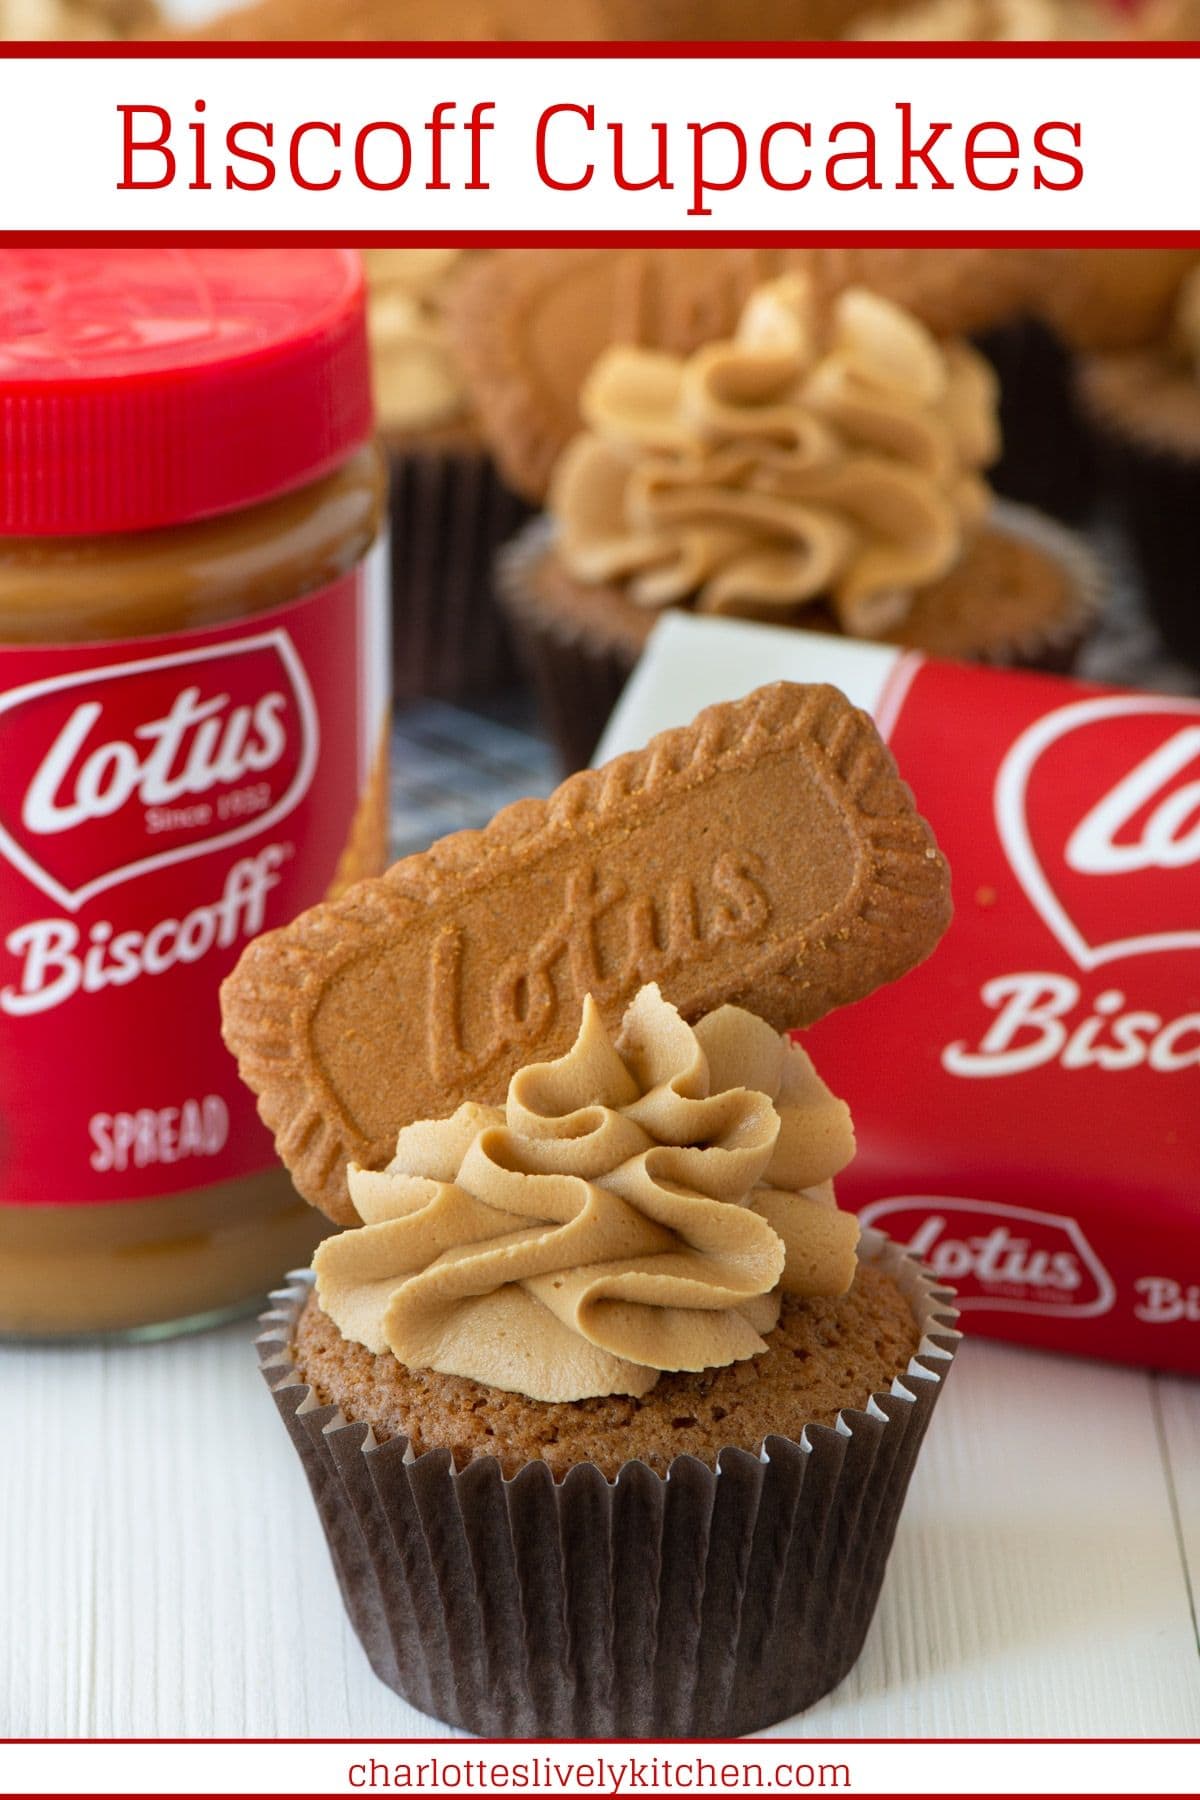 A Biscoff cupcake with Biscoff spread, biscuits and more cupcakes in the background. The image includes the text "Biscoff Cupcakes" in red letters.